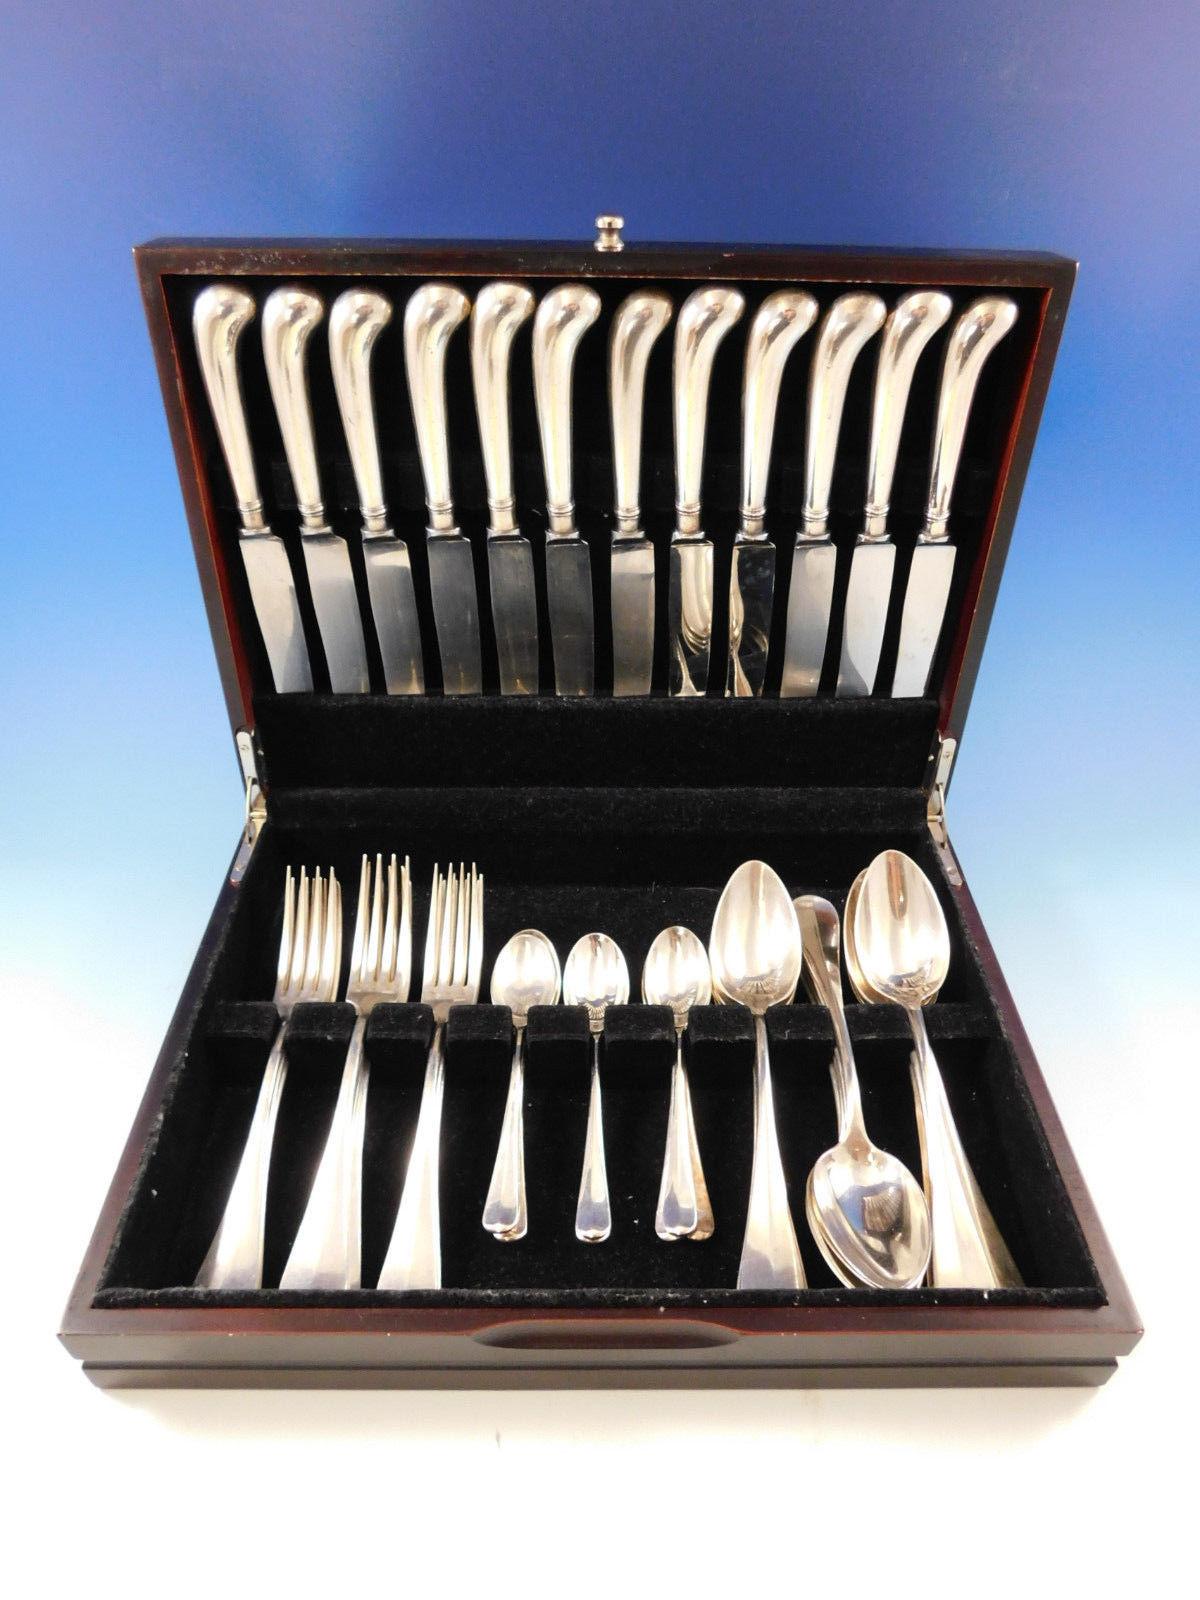 Dinner size Rattail by Robert Belk & French silverplate flatware set, 42 pieces. This set includes:

12 dinner size knives, 10